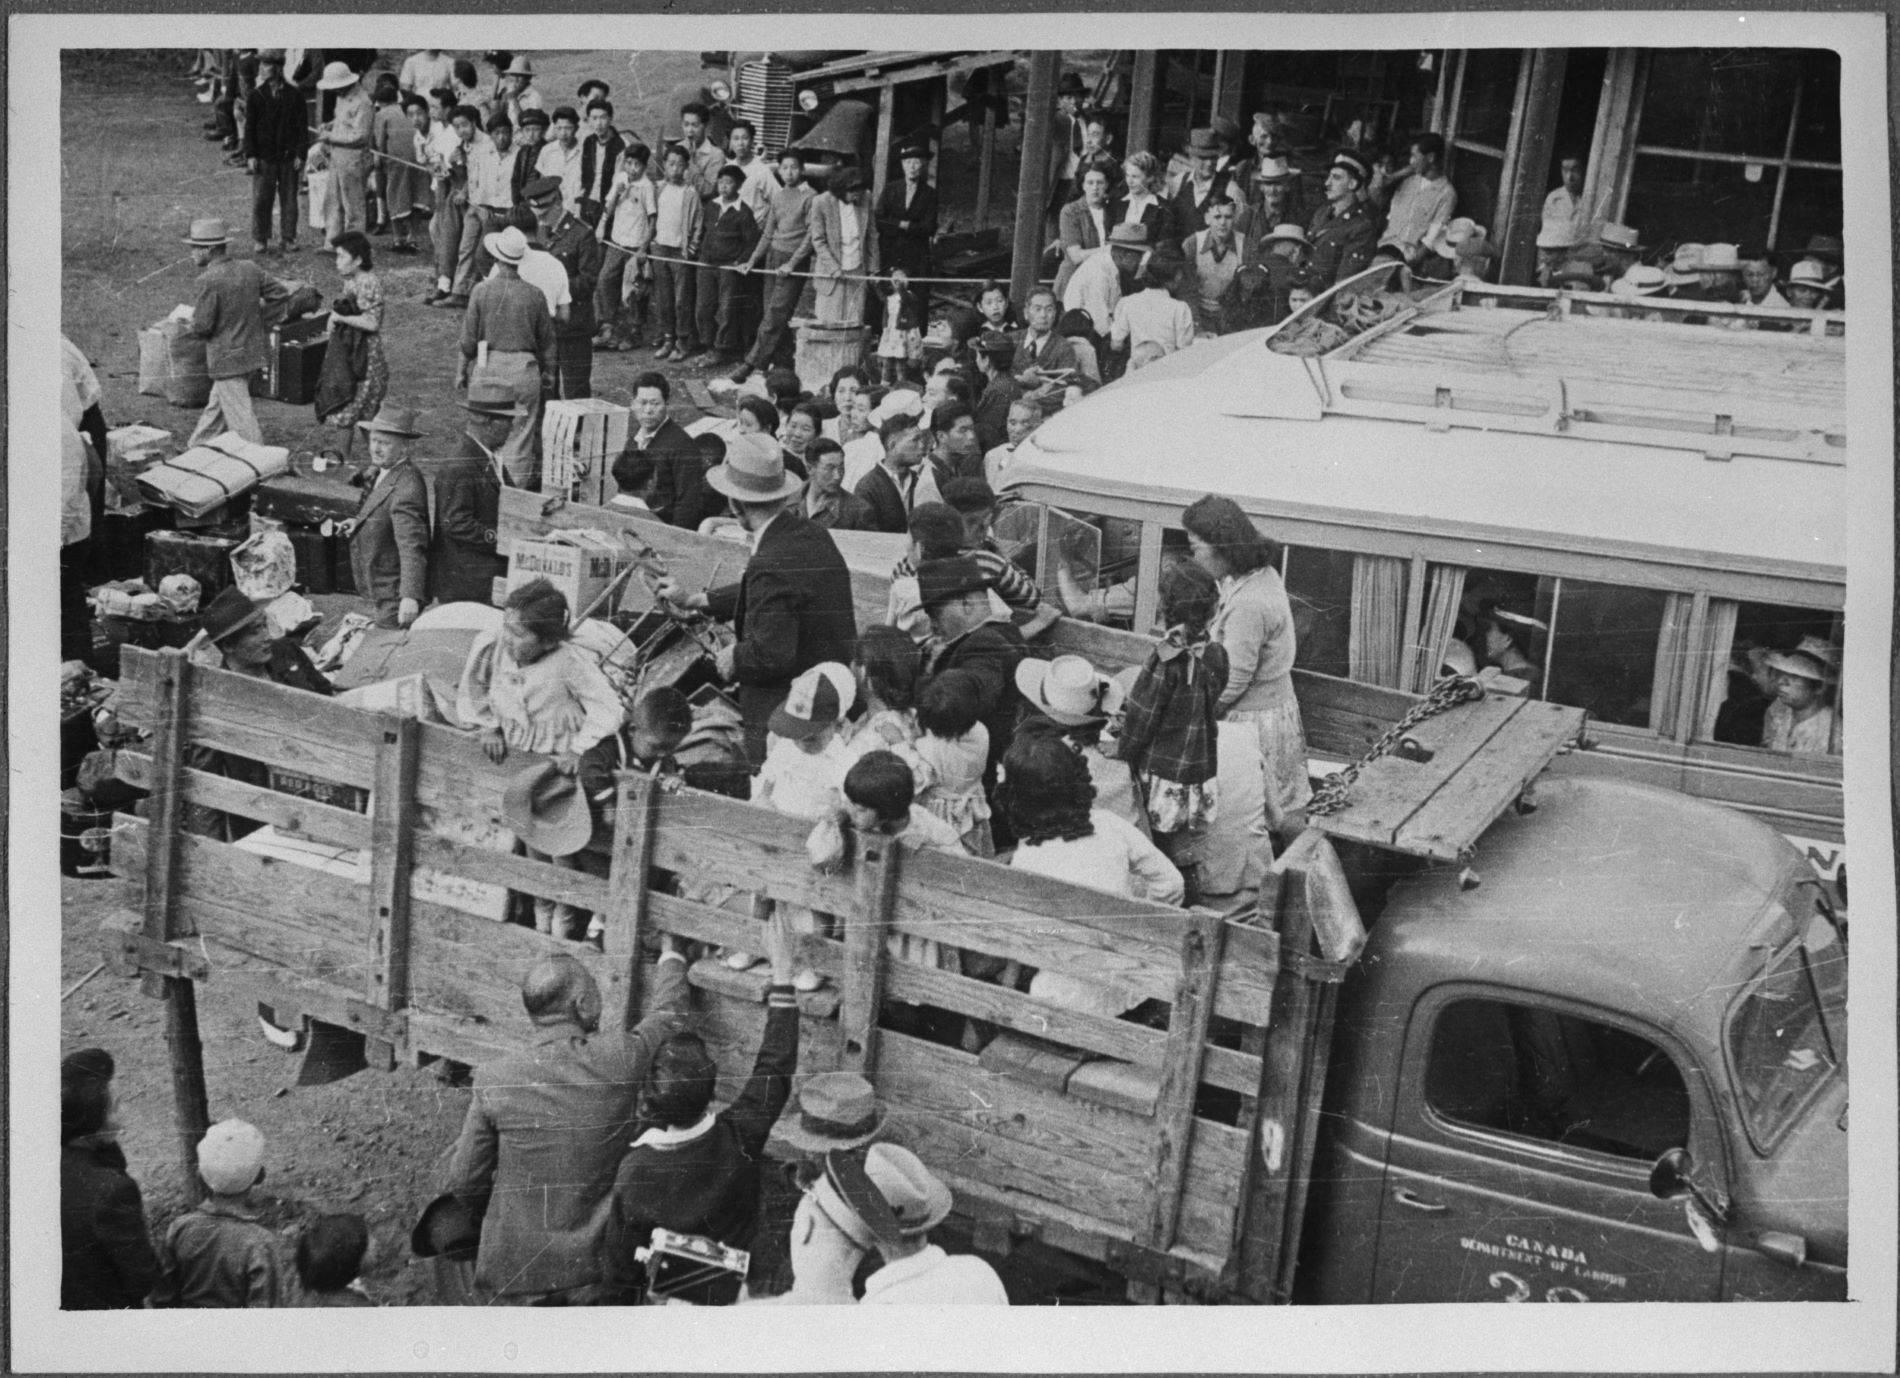 Group of Japanese Canadians being transported to camp at Slocan, British Columbia, 1942 / Photo: Tak Toyota Library and Archives Canada, C-046350